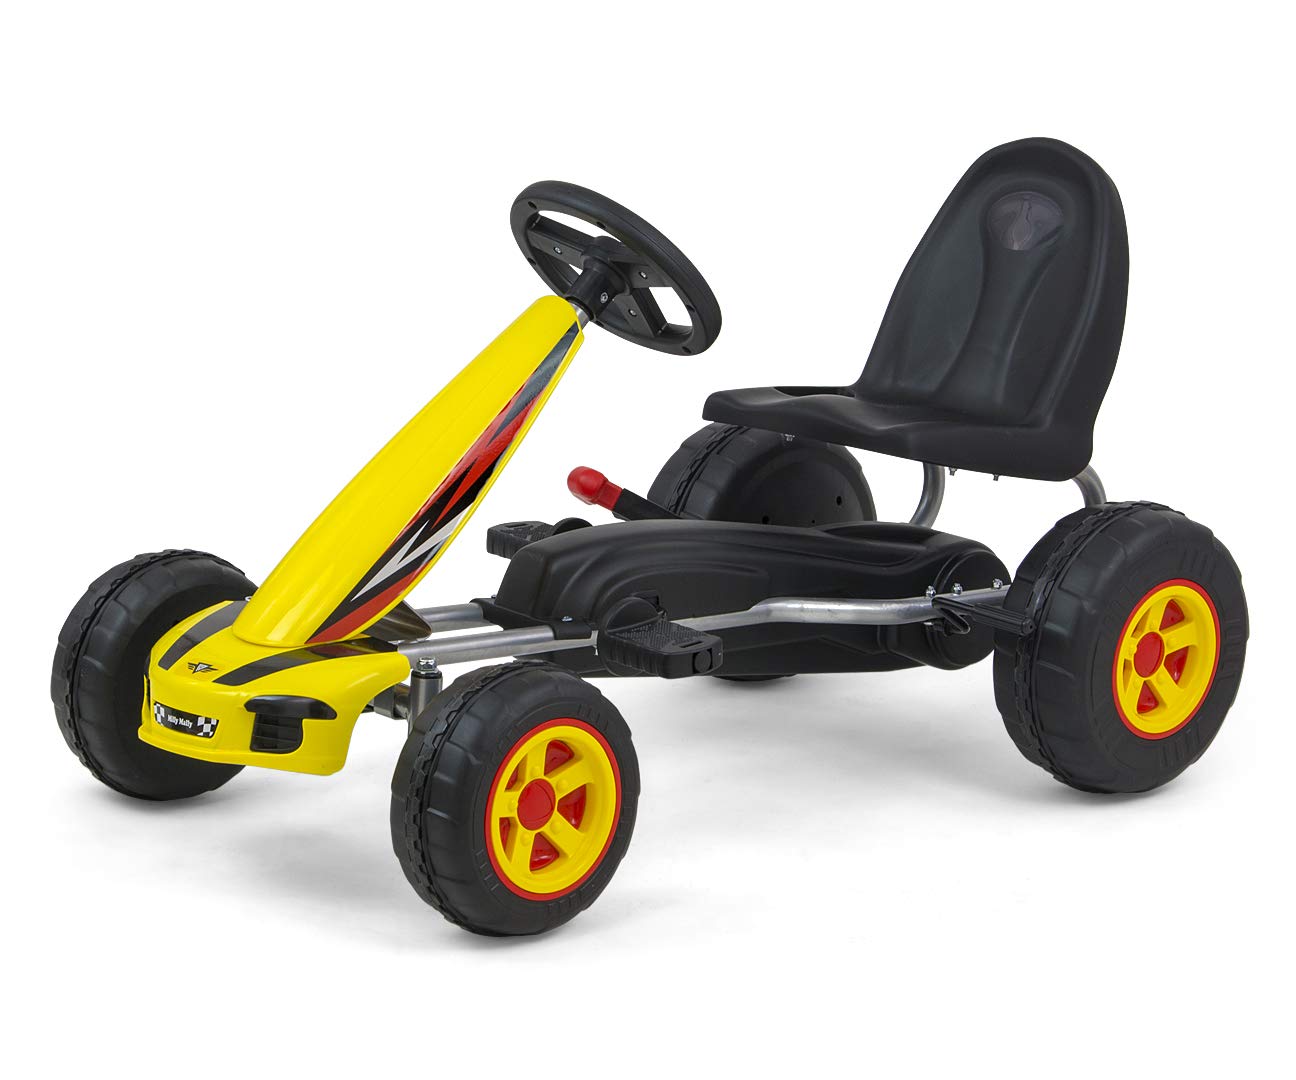 Milly Mally 5901761125863 Go-Kart with pedals Viper Yellow, gelb, 7.4 kg